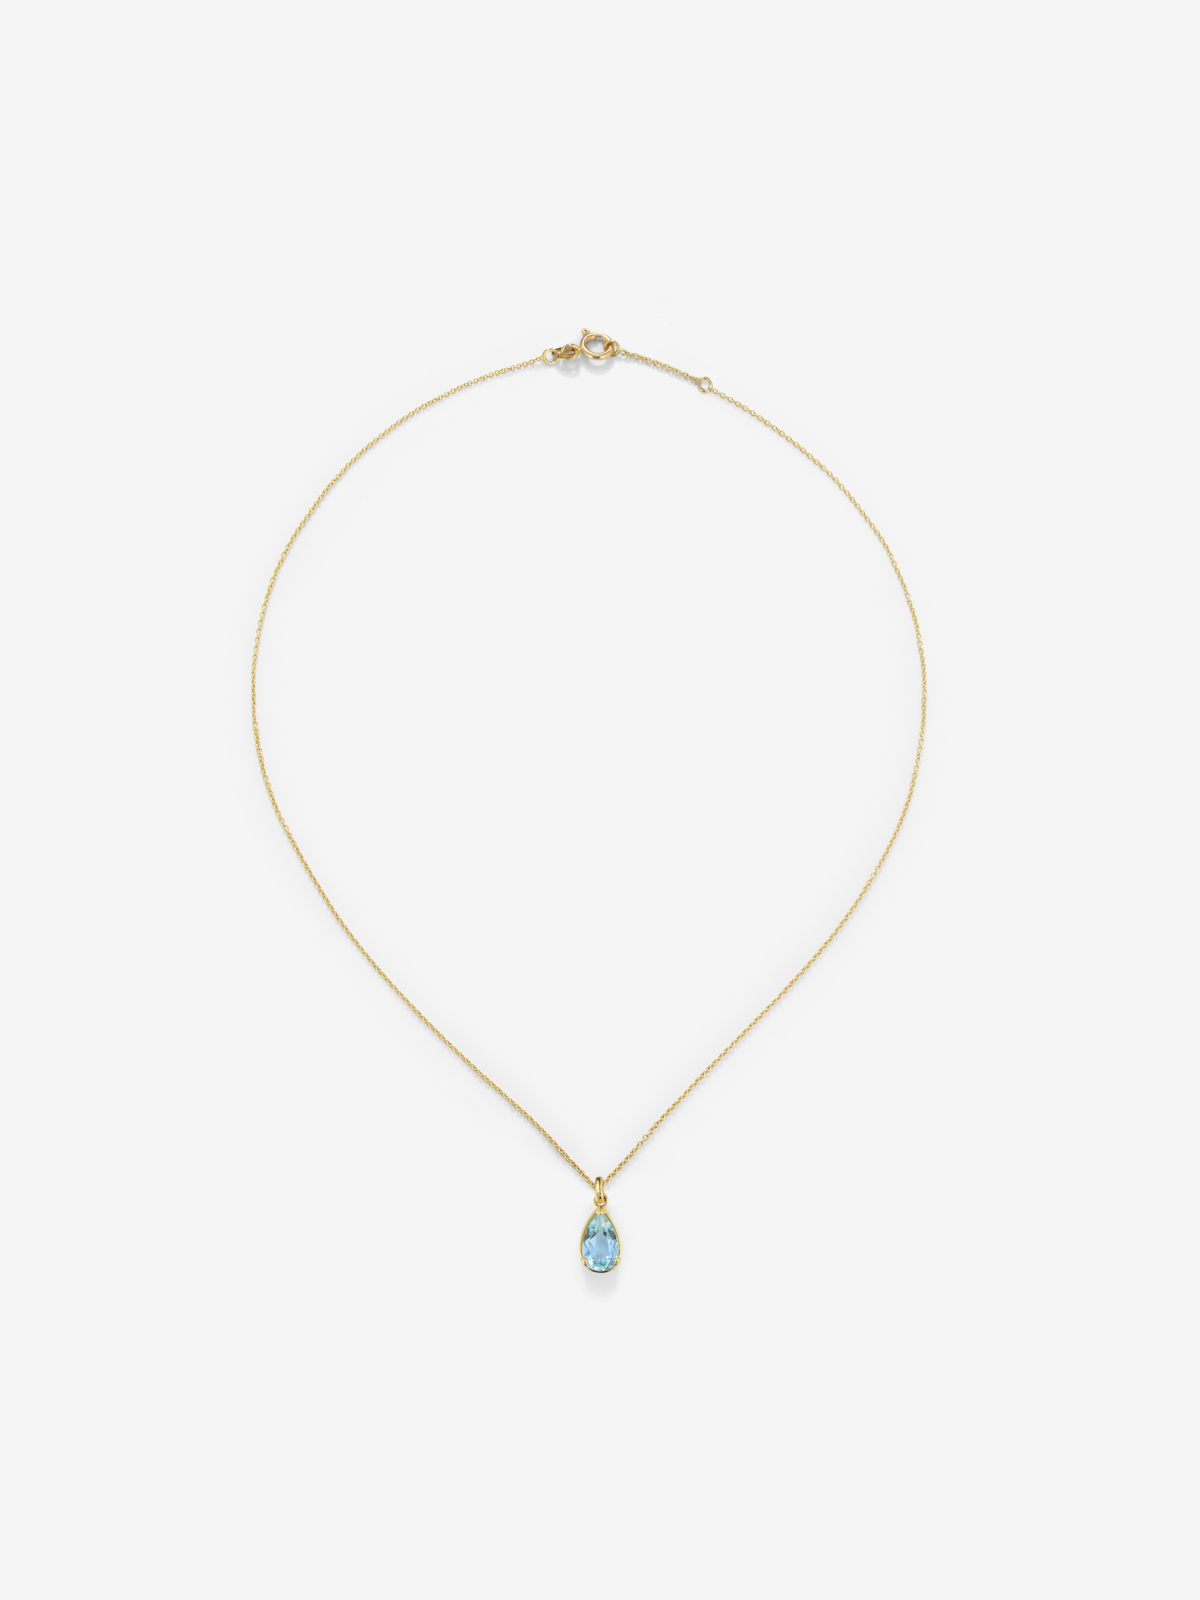 18K yellow gold pendant necklace with topaz